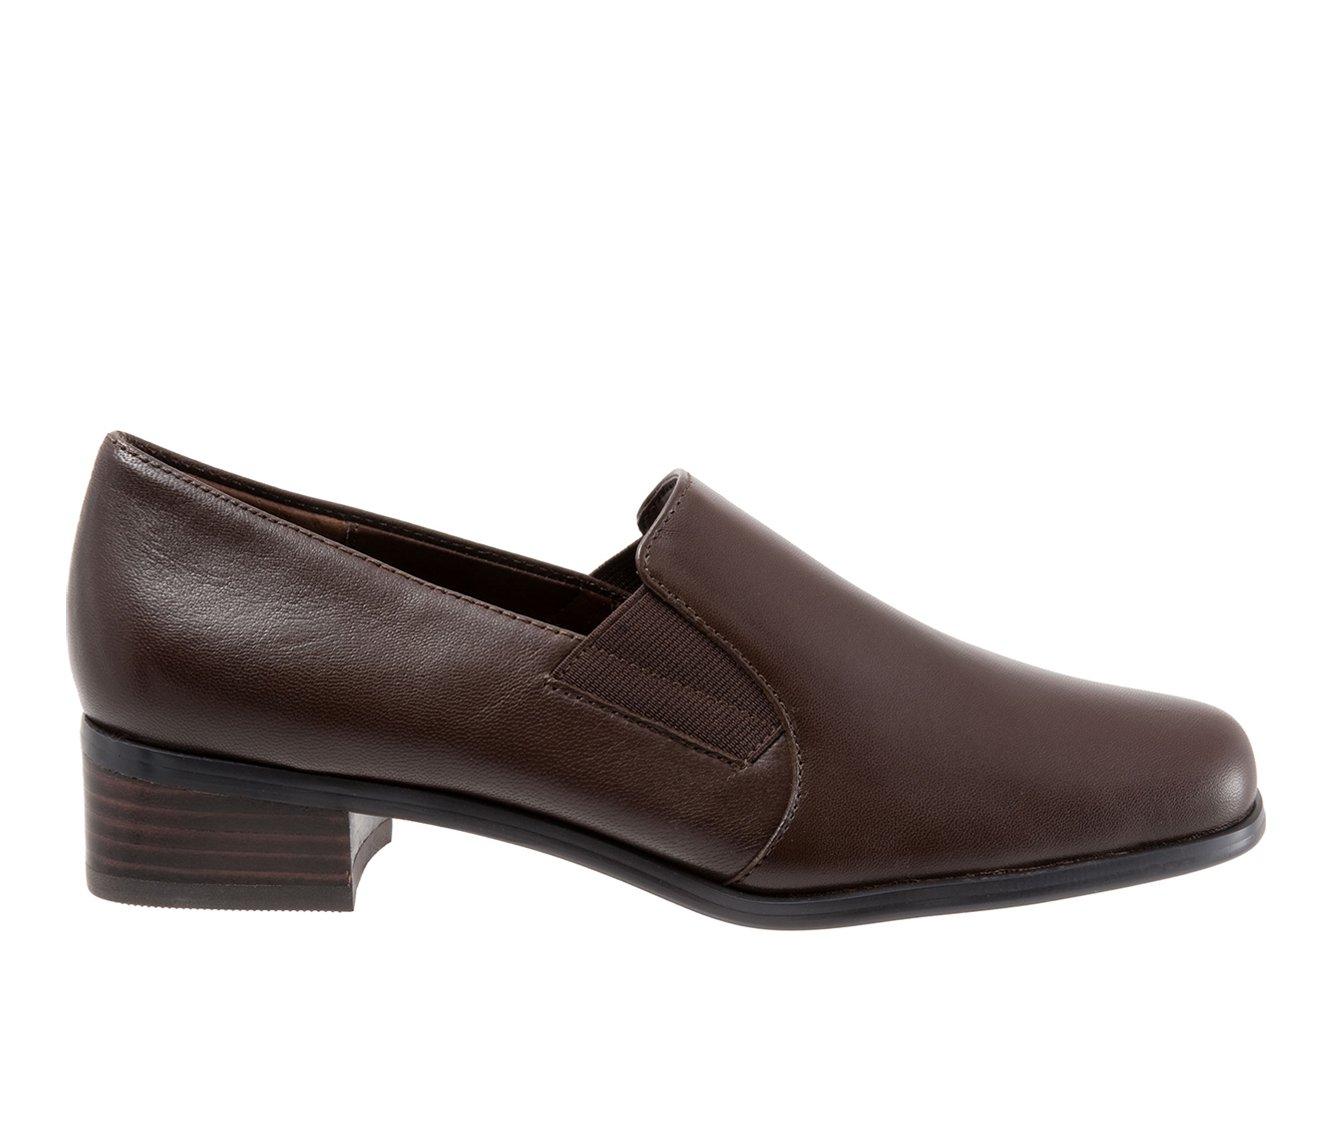 Women's Trotters Ash Heeled Loafers